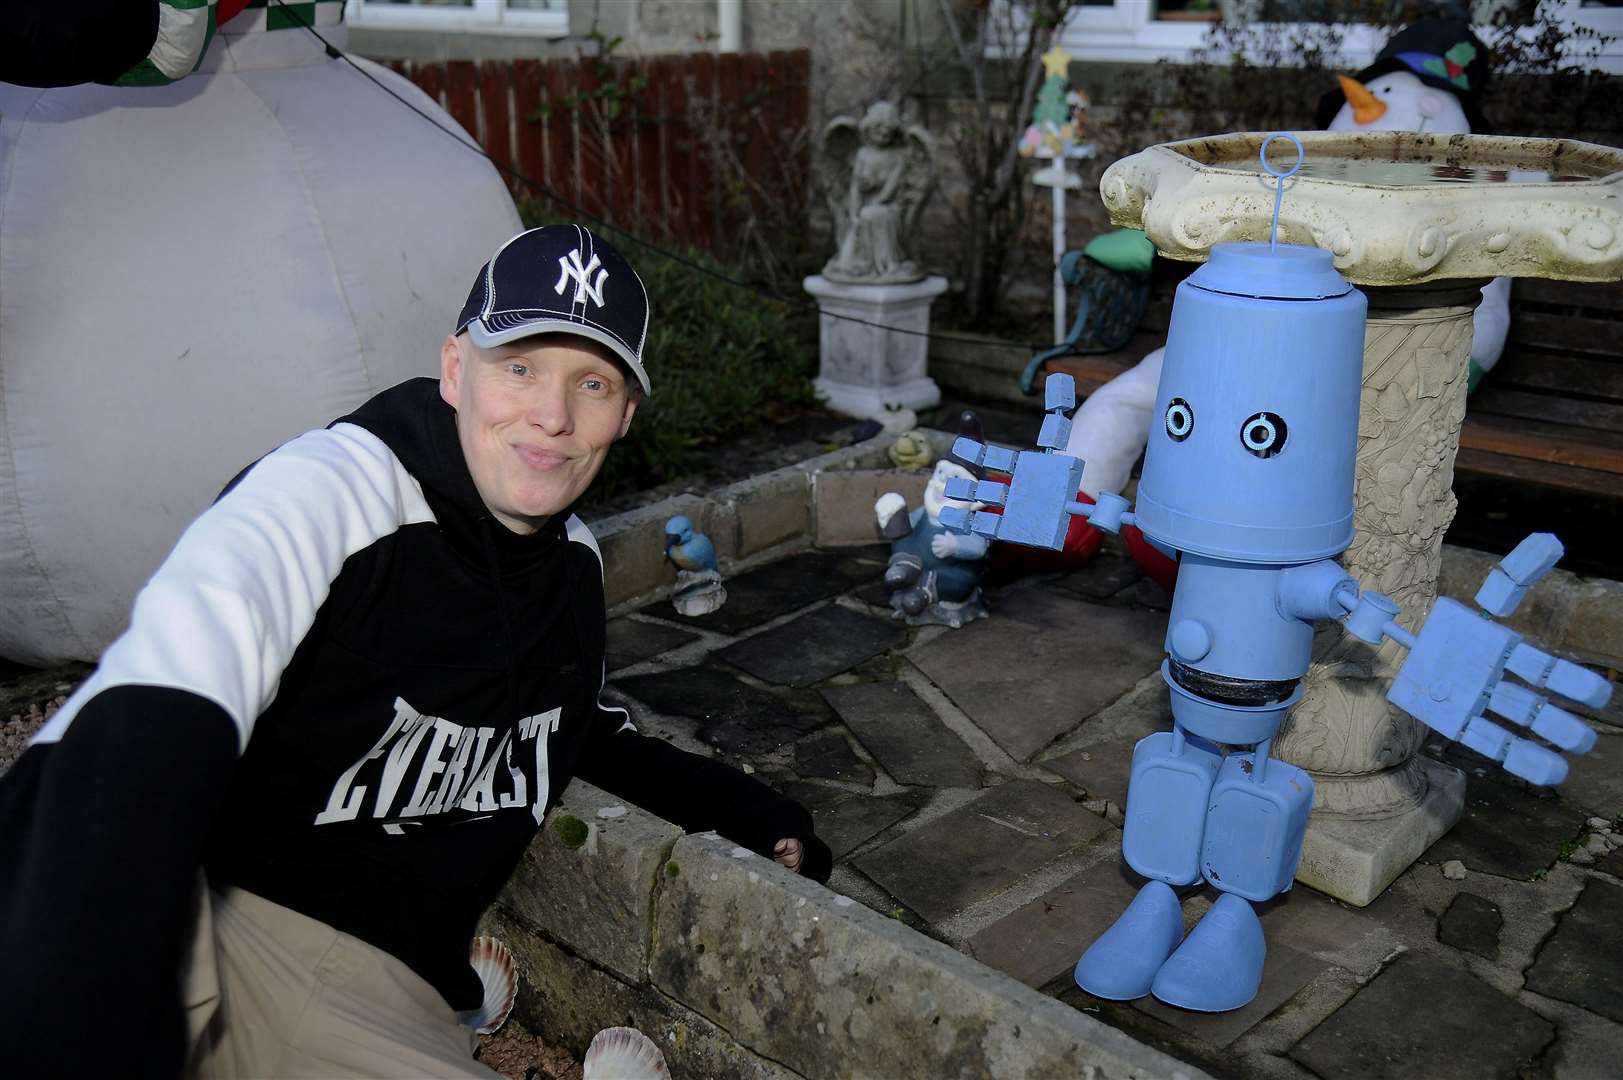 Mark with his new home-made robot. Picture: Becky Saunderson